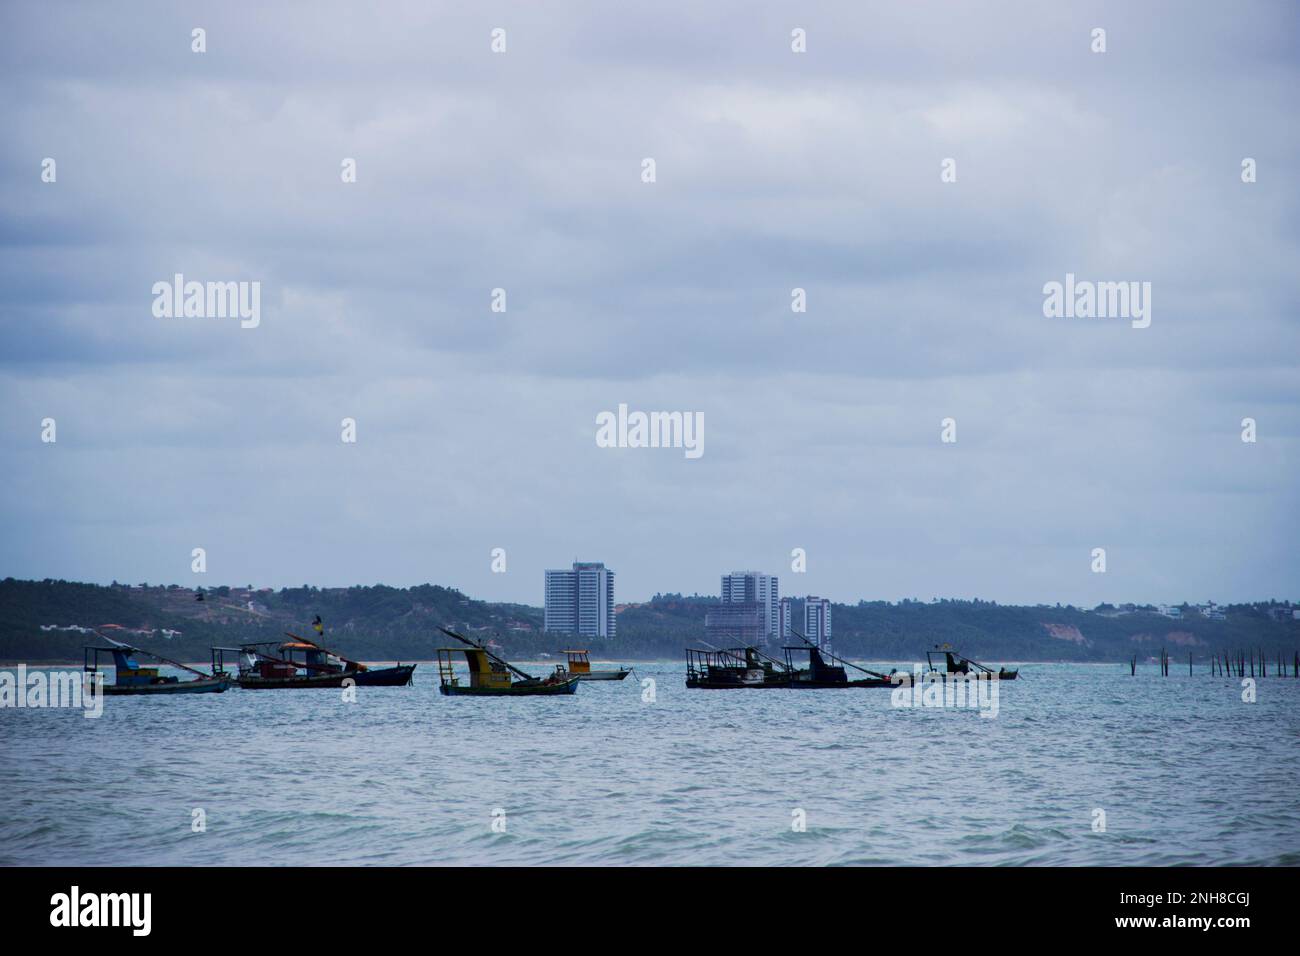 A sunny cloudy day on the beach, with the boats resting in silence. Stock Photo